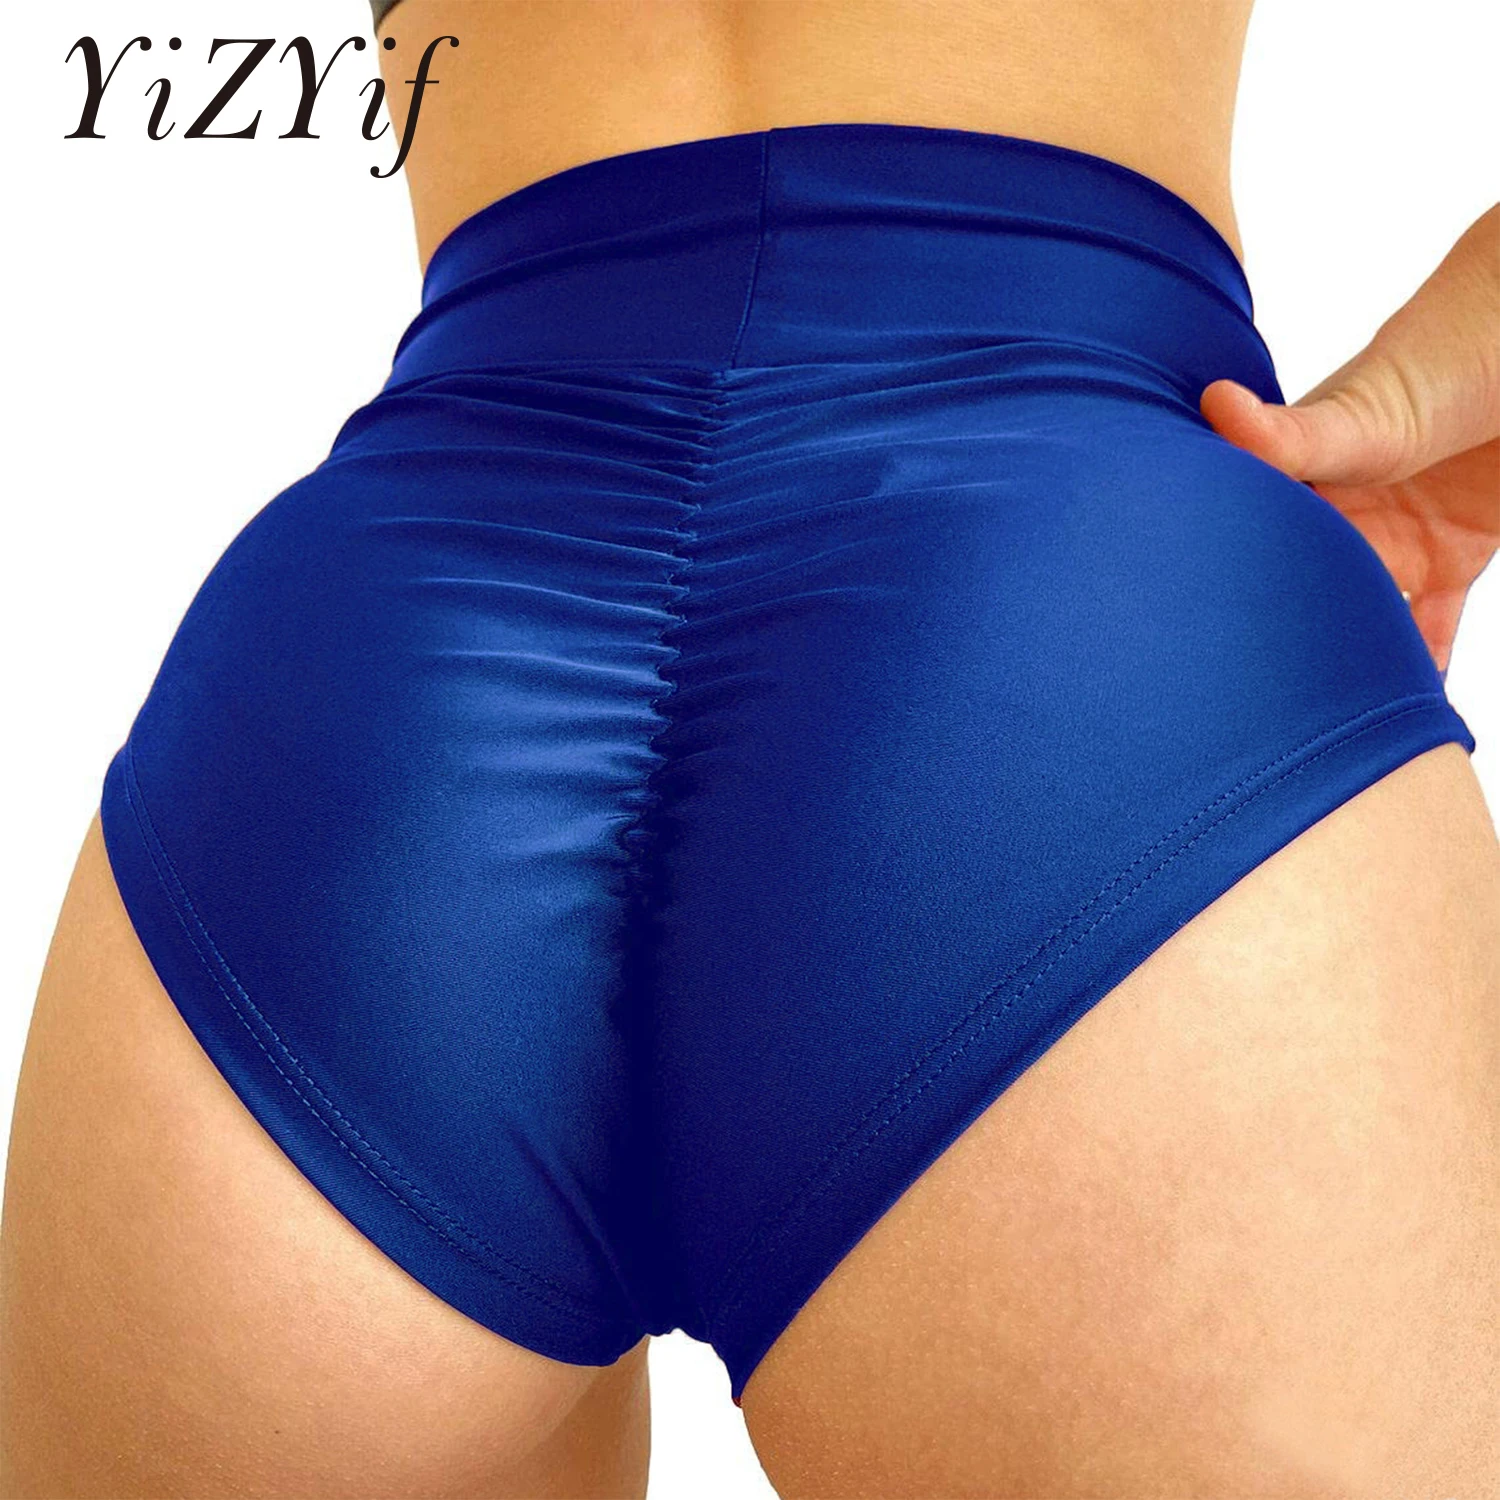 

Womens Fashion Ruched Back Booty Shorts Ladies Solid High Waist Panties Hot Pants Party Clubwear Sexy Hips Push Up Sportwear